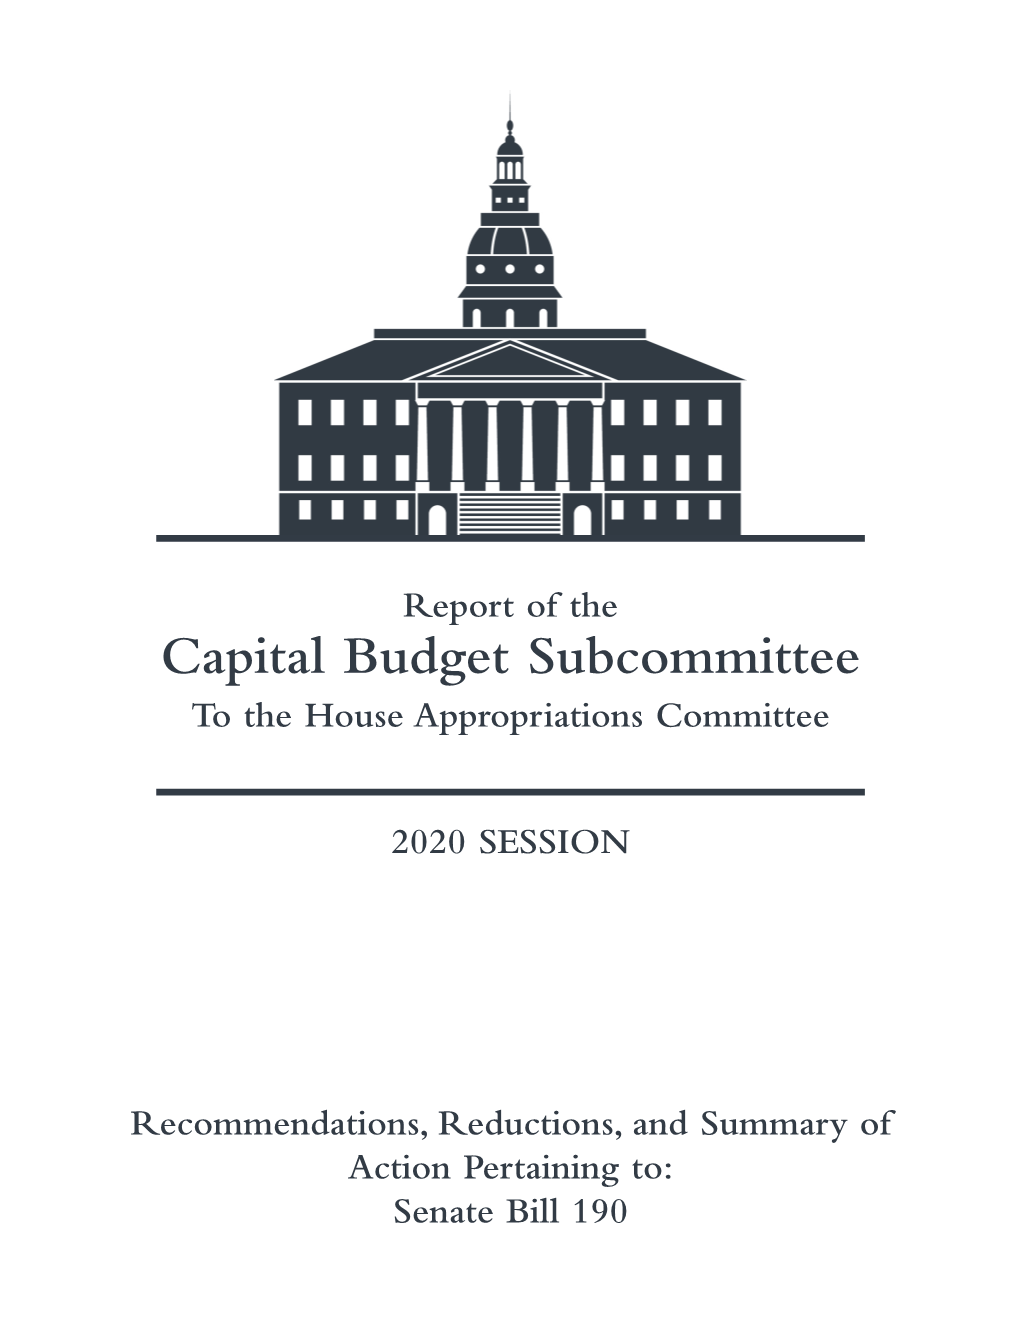 Report of the Capital Budget Subcommittee to the House Appropriations Committee